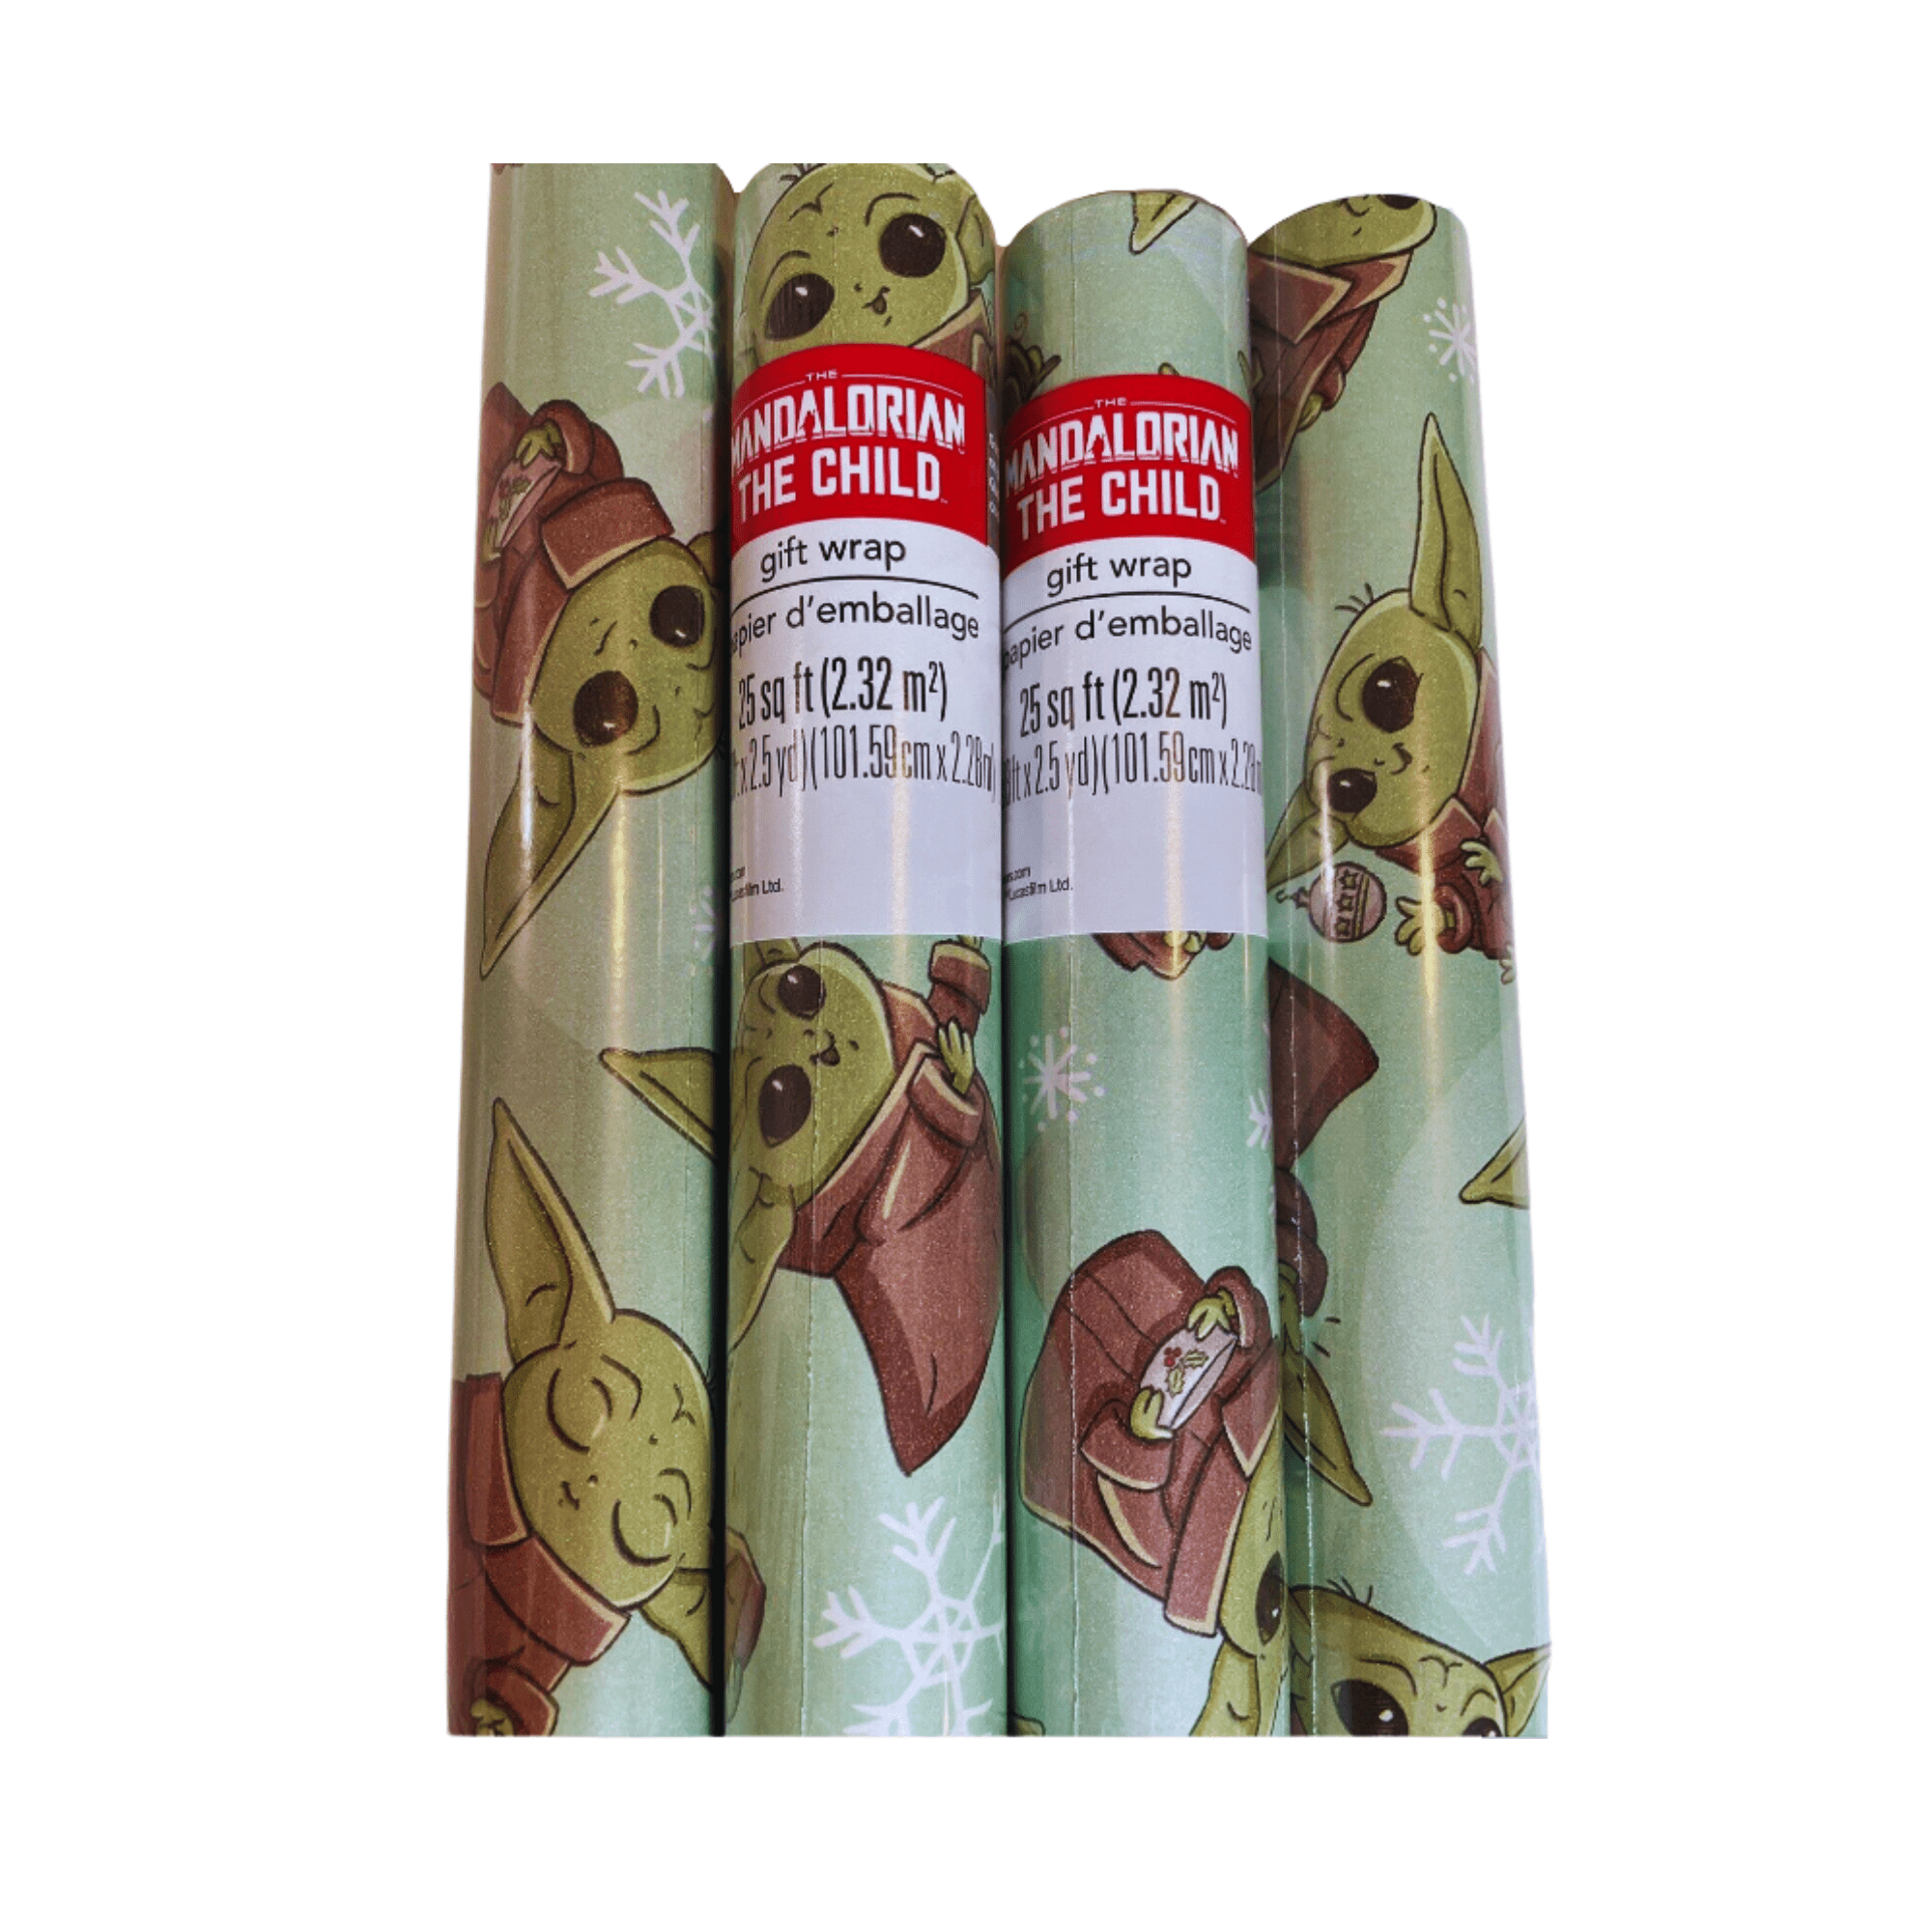 2C Star Wars Yoda and Friends Christmas Wrapping Paper 2 Rolls 20 Sq Ft.  Each Birthday Party Special Occasions Festive Design with (1) Pack of Gift  Tags 